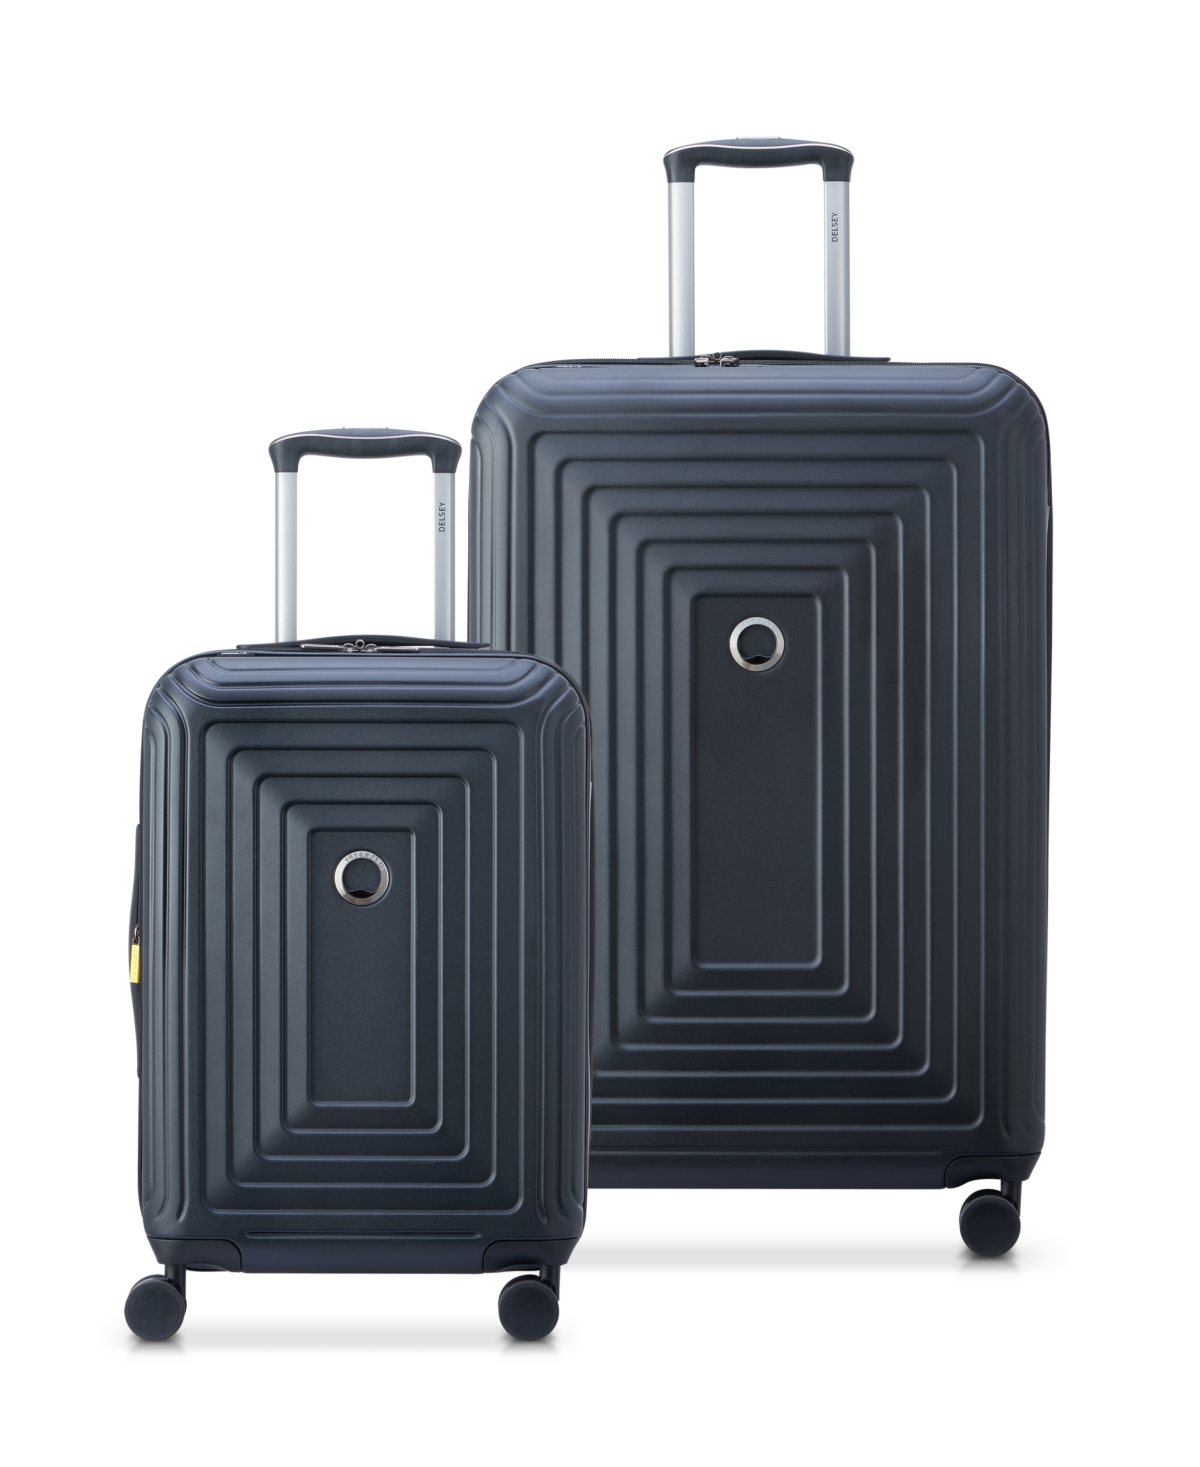 Delsey Corsica 2 Piece Hardside Luggage Set, Carry-on And 27" Spinner In Matte Black